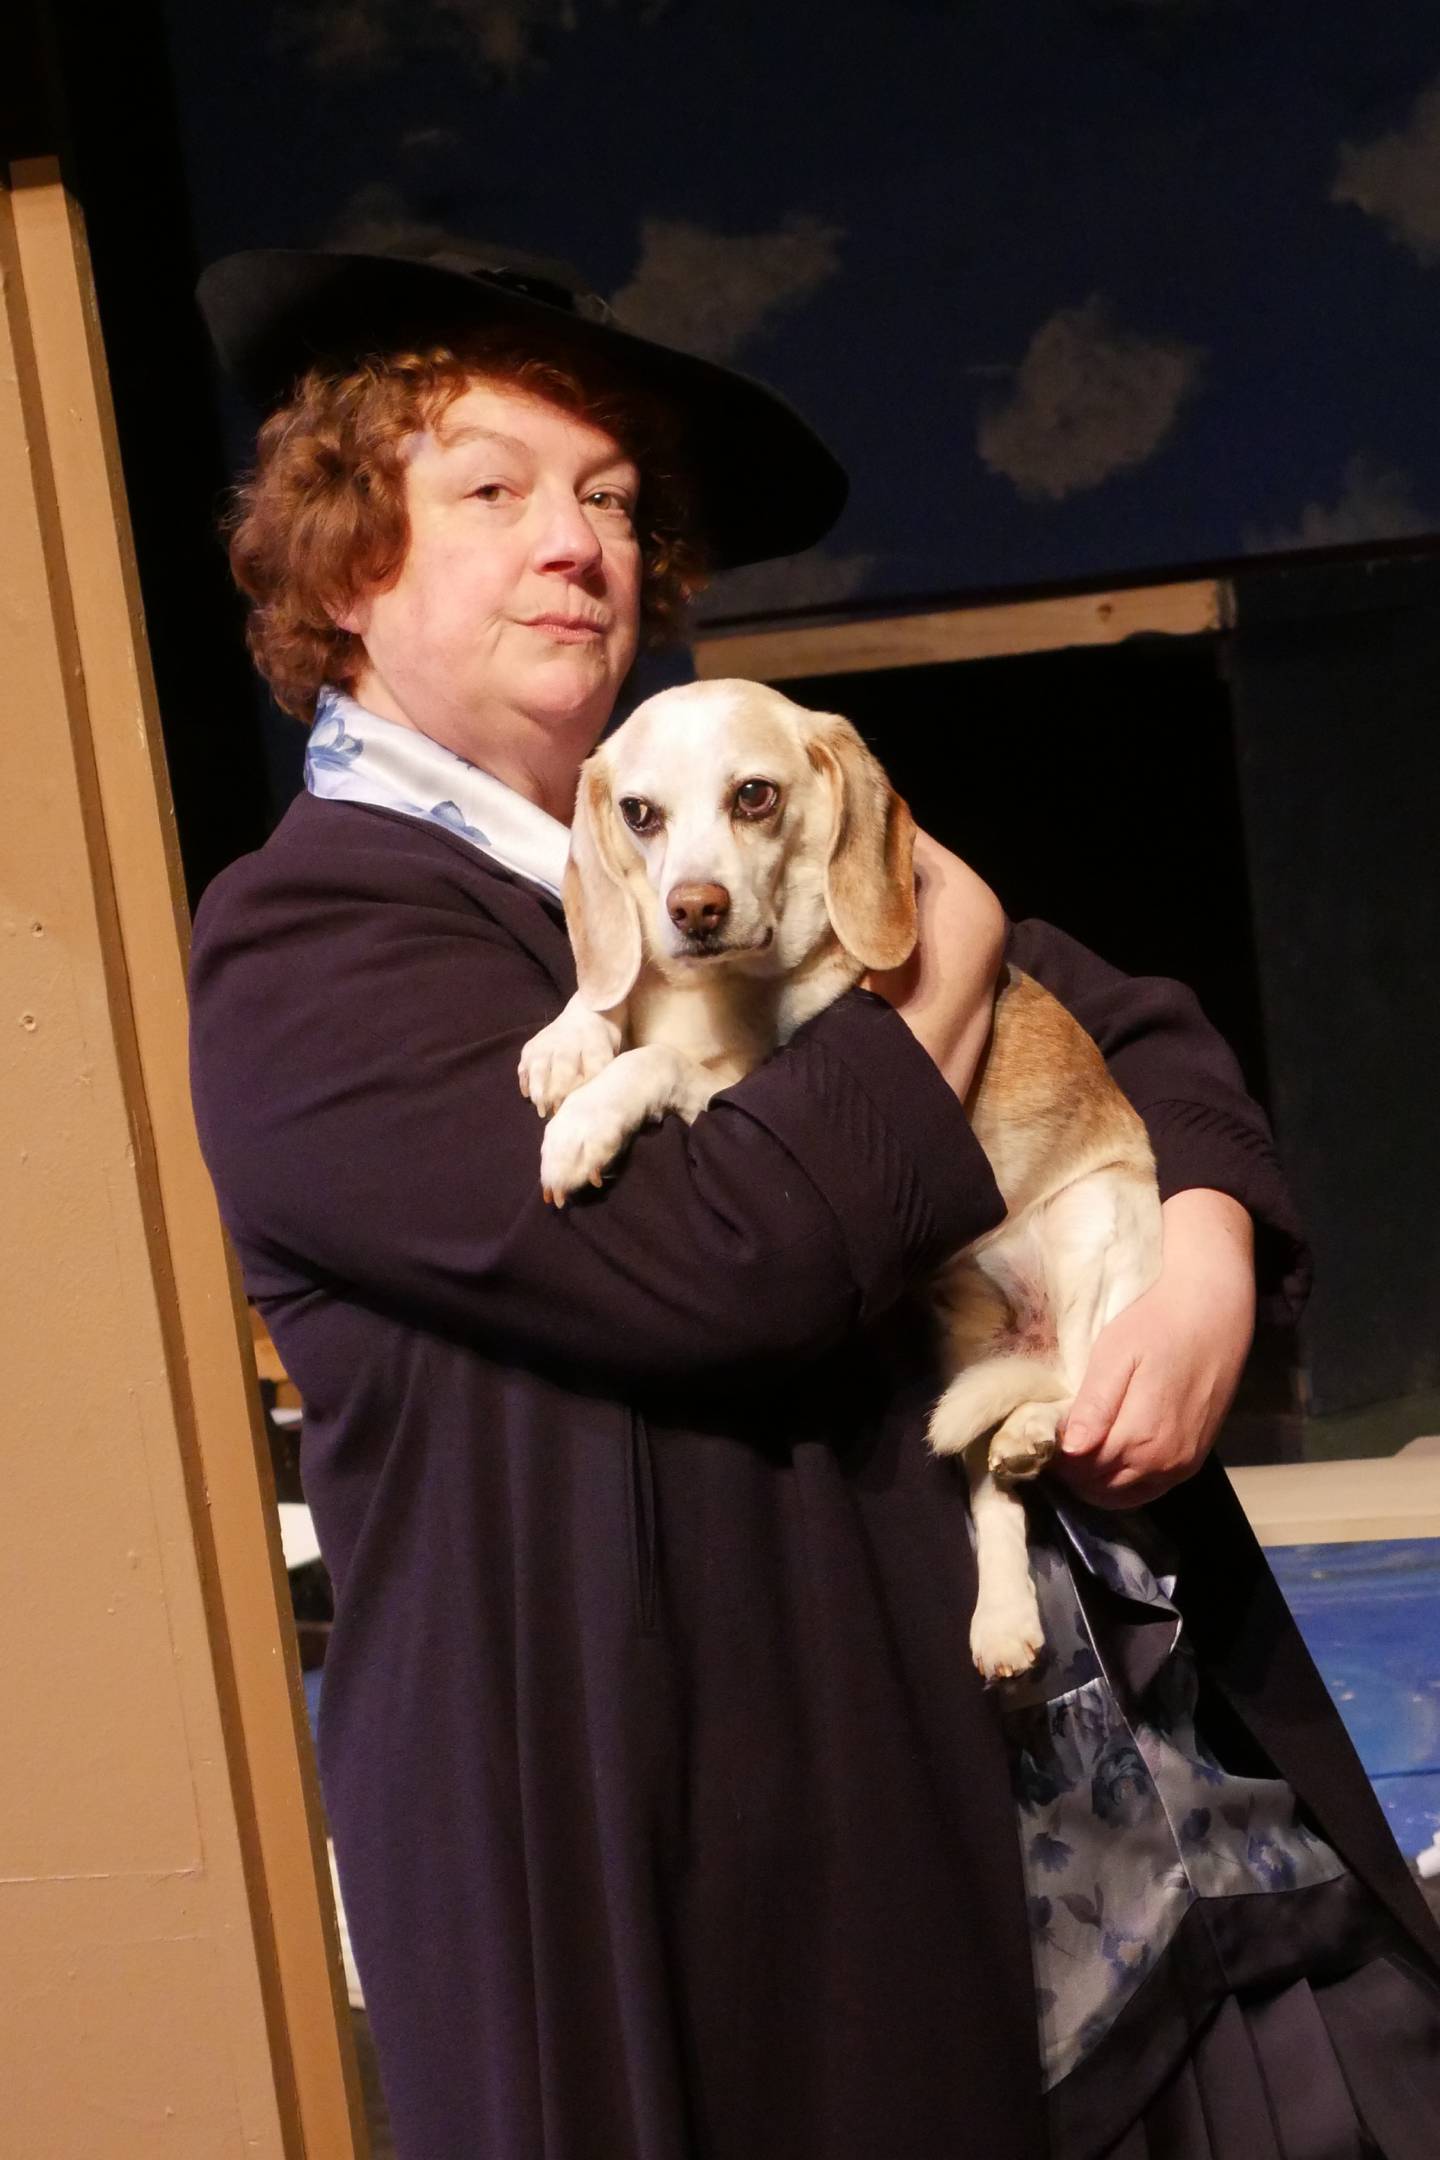 Tammy O'Reilly of La Grange stars as Rose in "Gypsy" for Theatre of Western Springs.